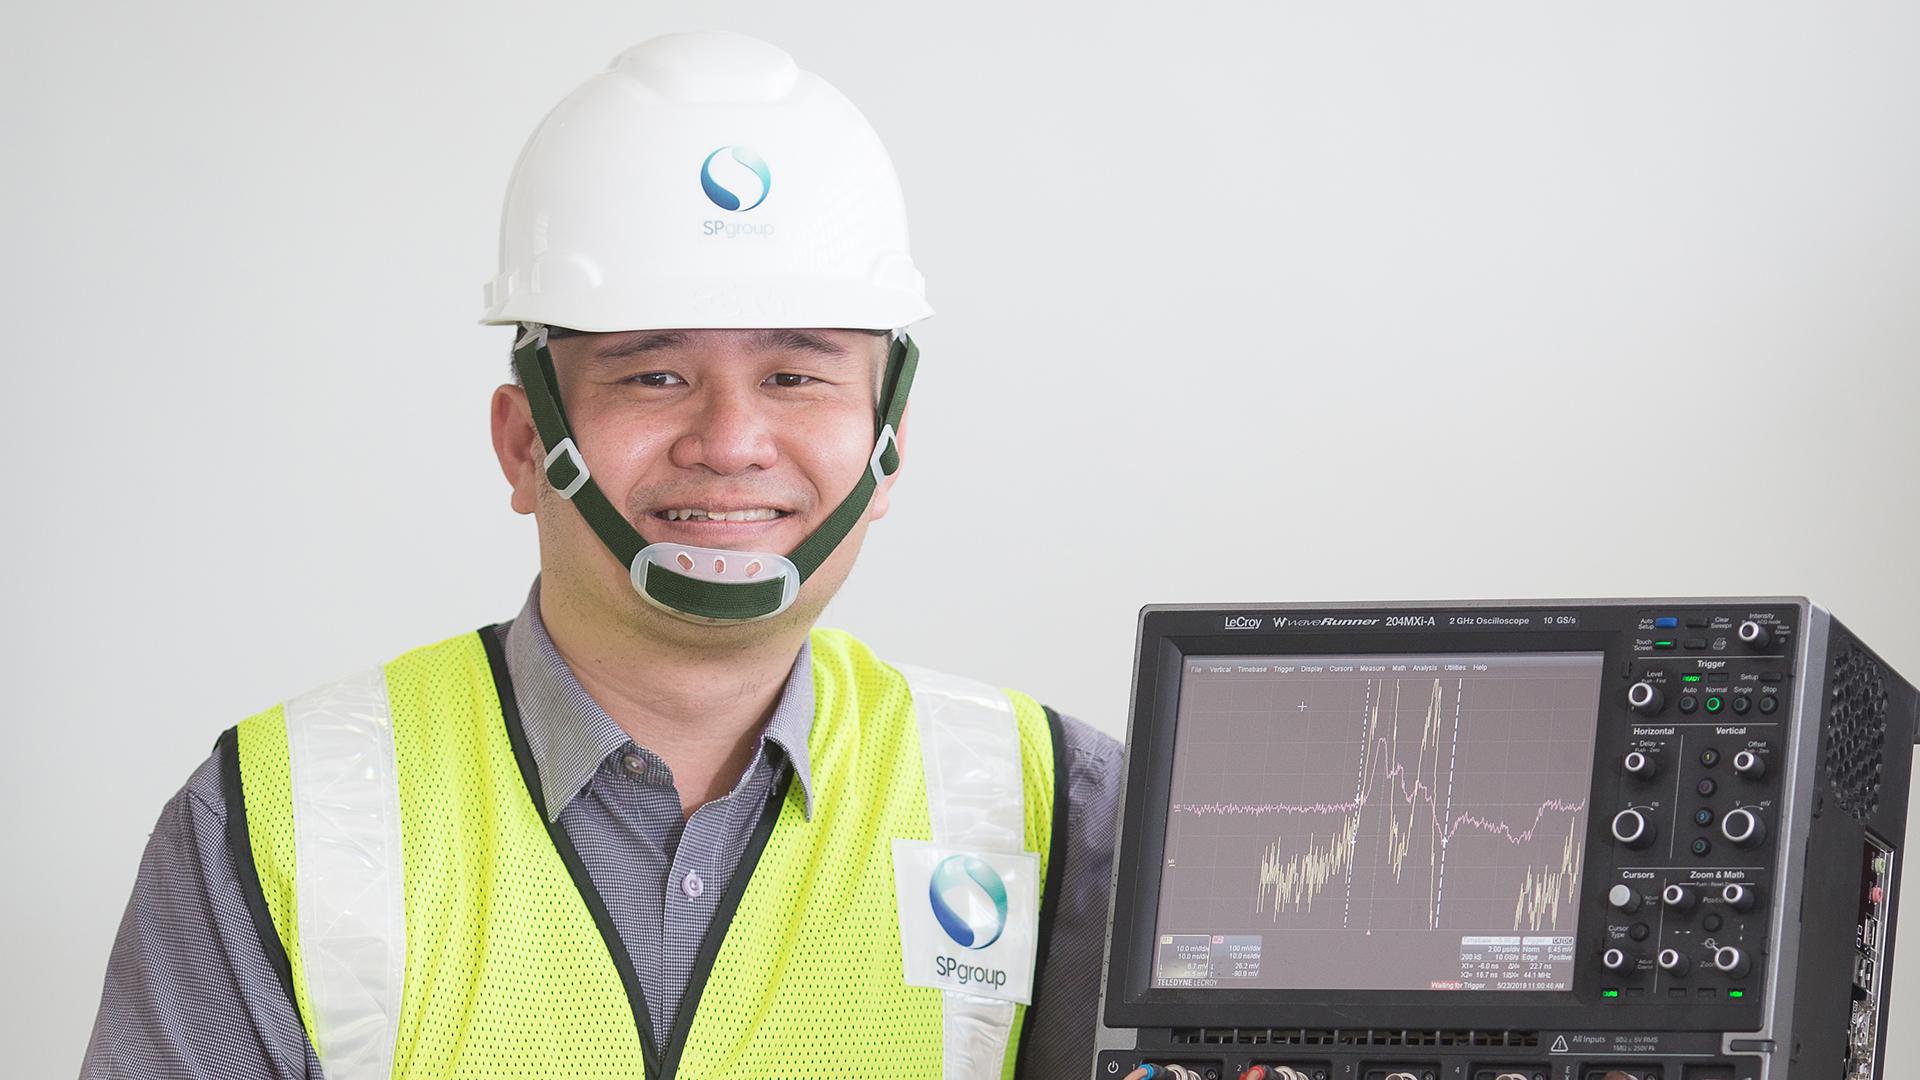 Reading the “pulse” of network equipment, Senior Engineer Dr Lai Kai Xian can tell whether insulation material within the equipment may be breaking down.